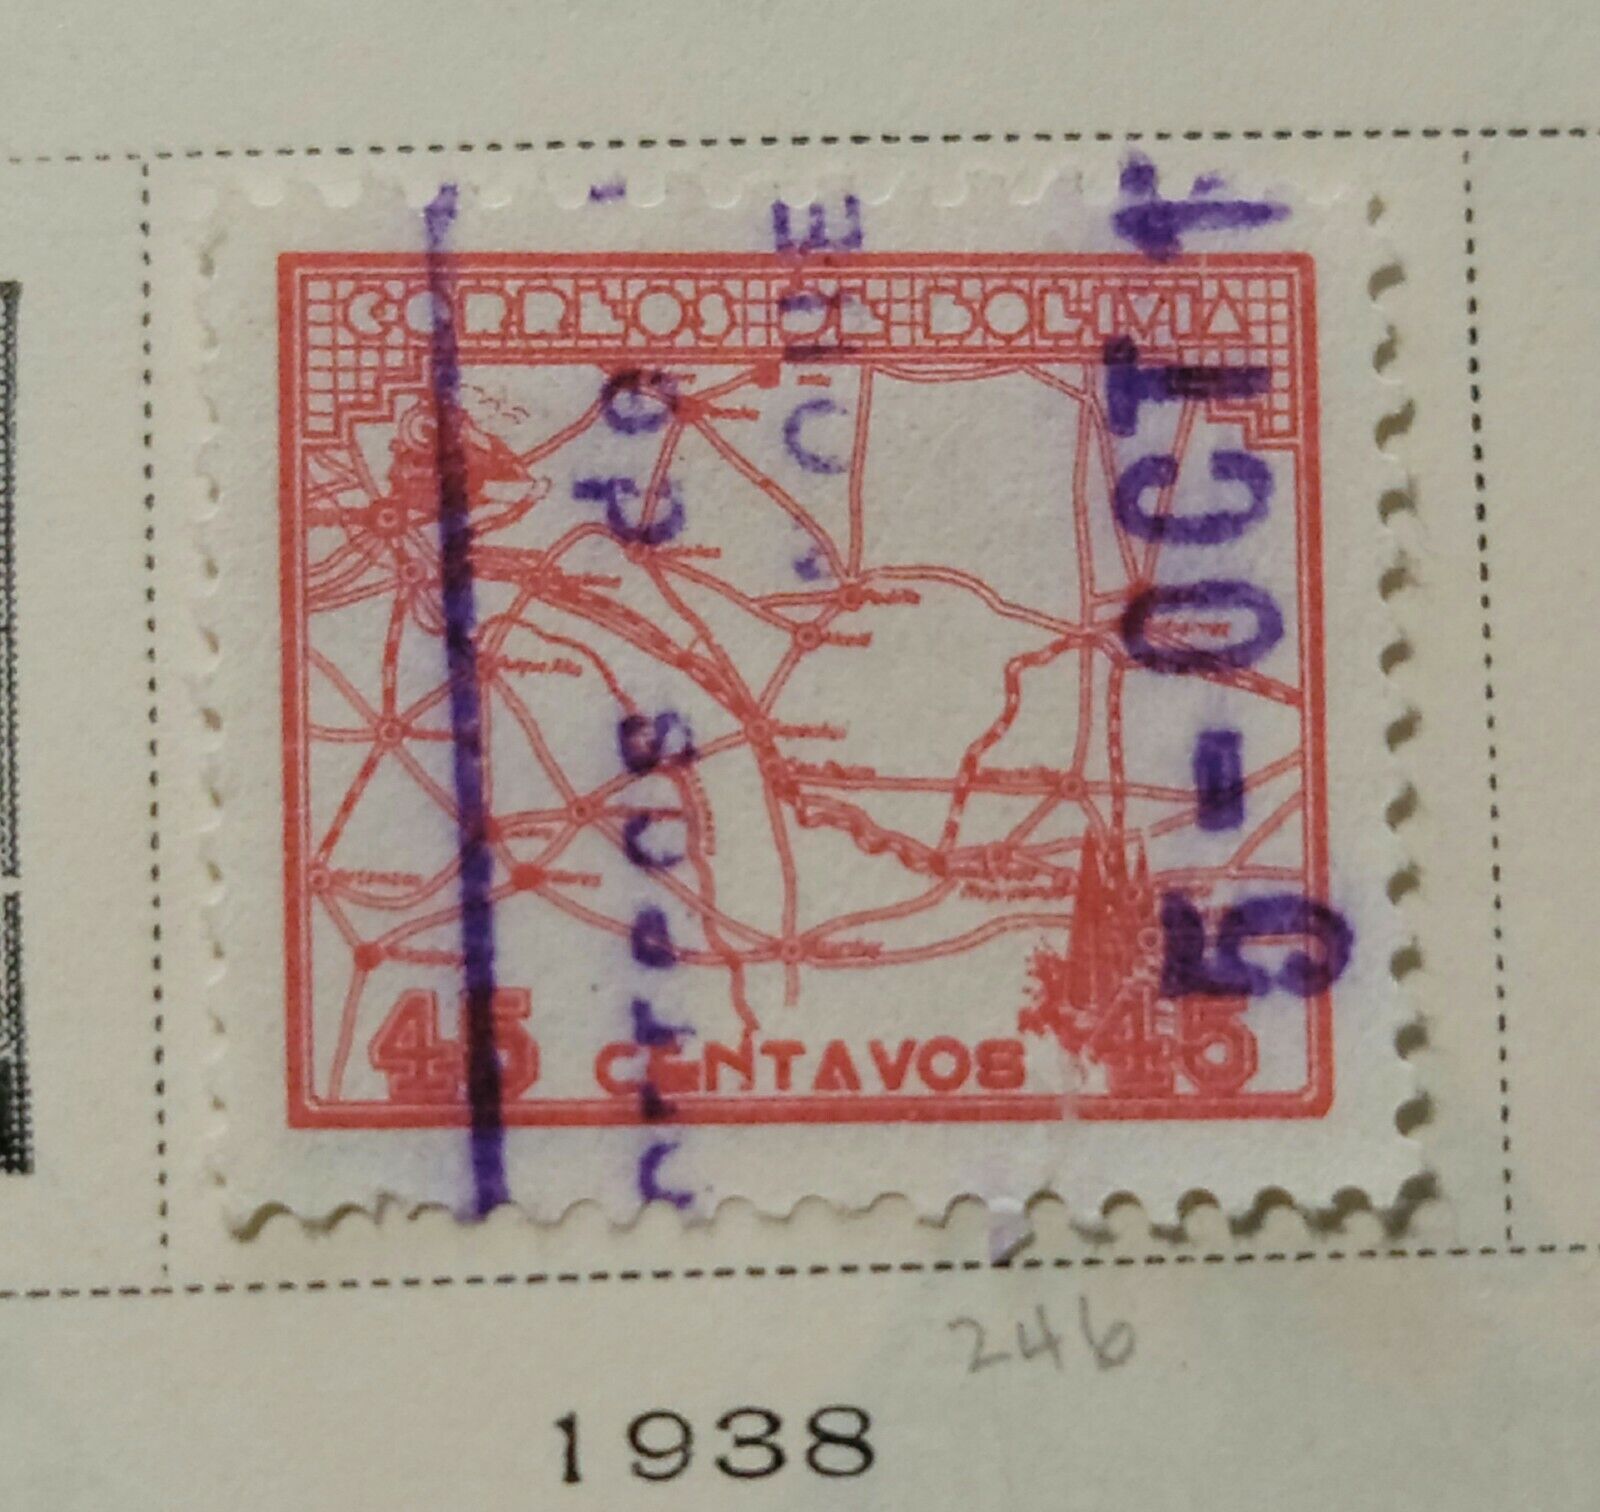 1938 Bolivia Postage Stamp Found In Old Collectors Book. Awesome Condition